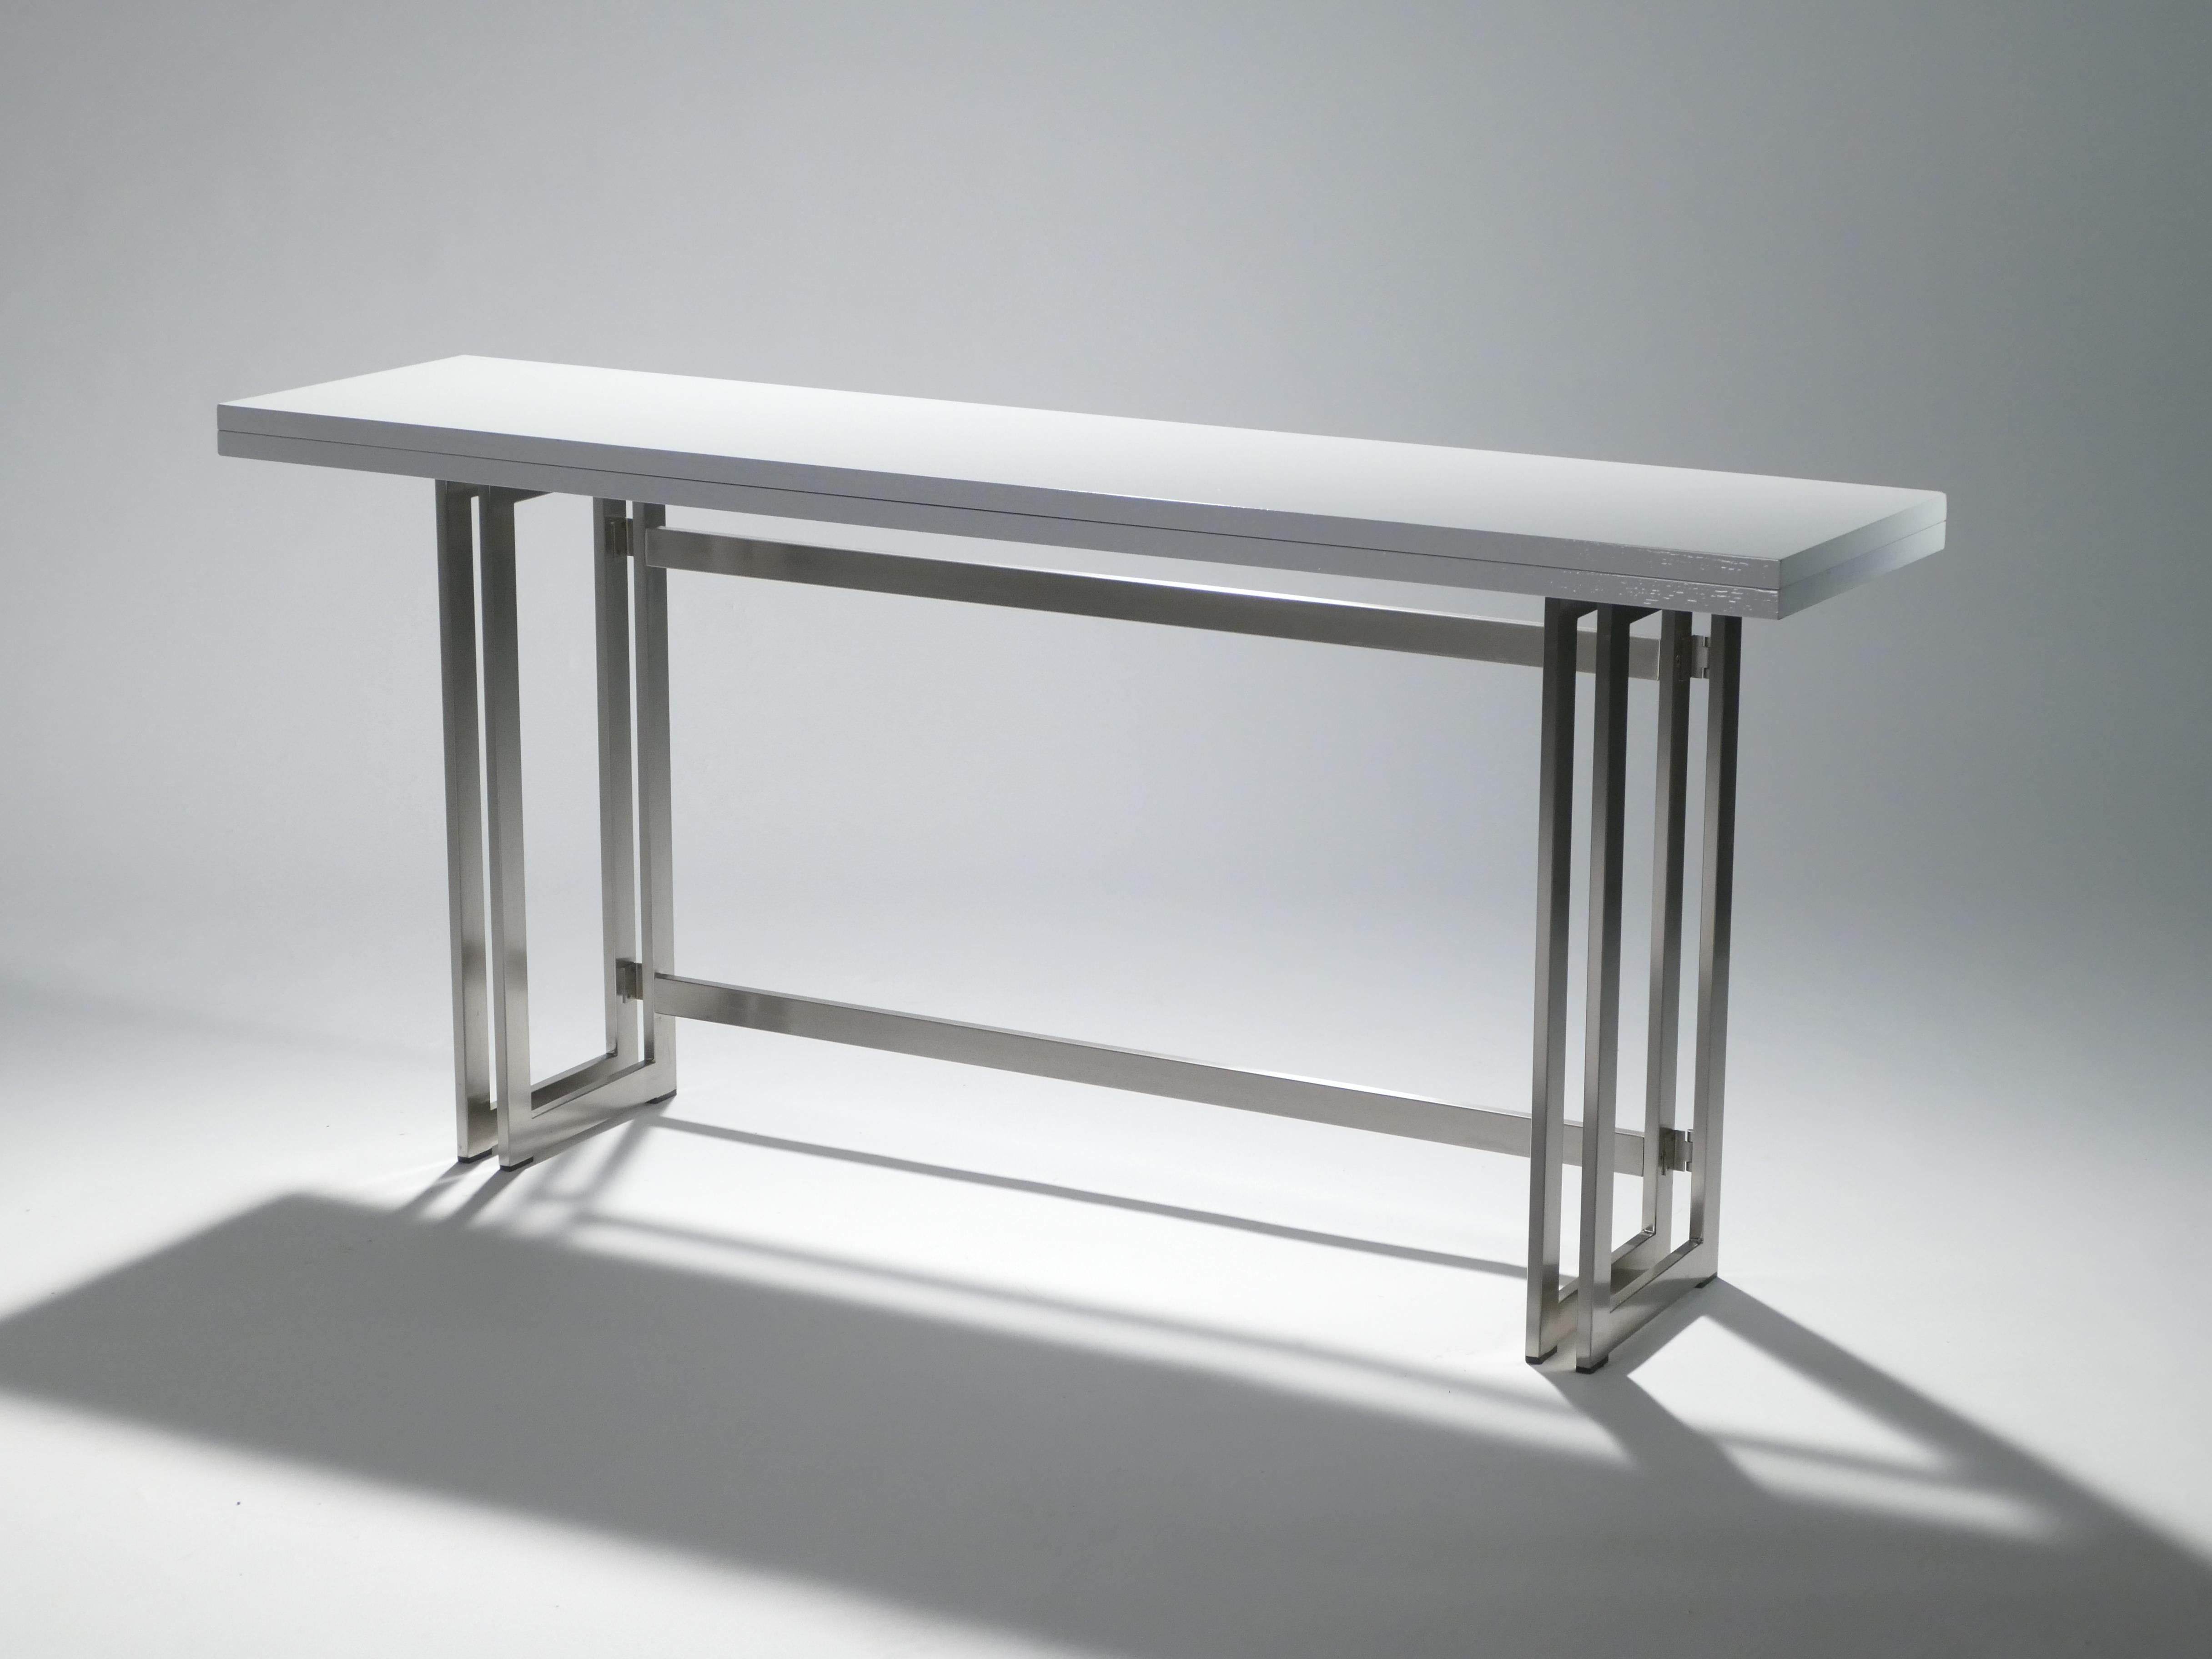 With a shining white lacquered top, sharply geometric brushed metal legs and a foldable body to fit your particular spatial needs, this midcentury Italian console table by Artelano carries a stellar futuristic midcentury aesthetic into the